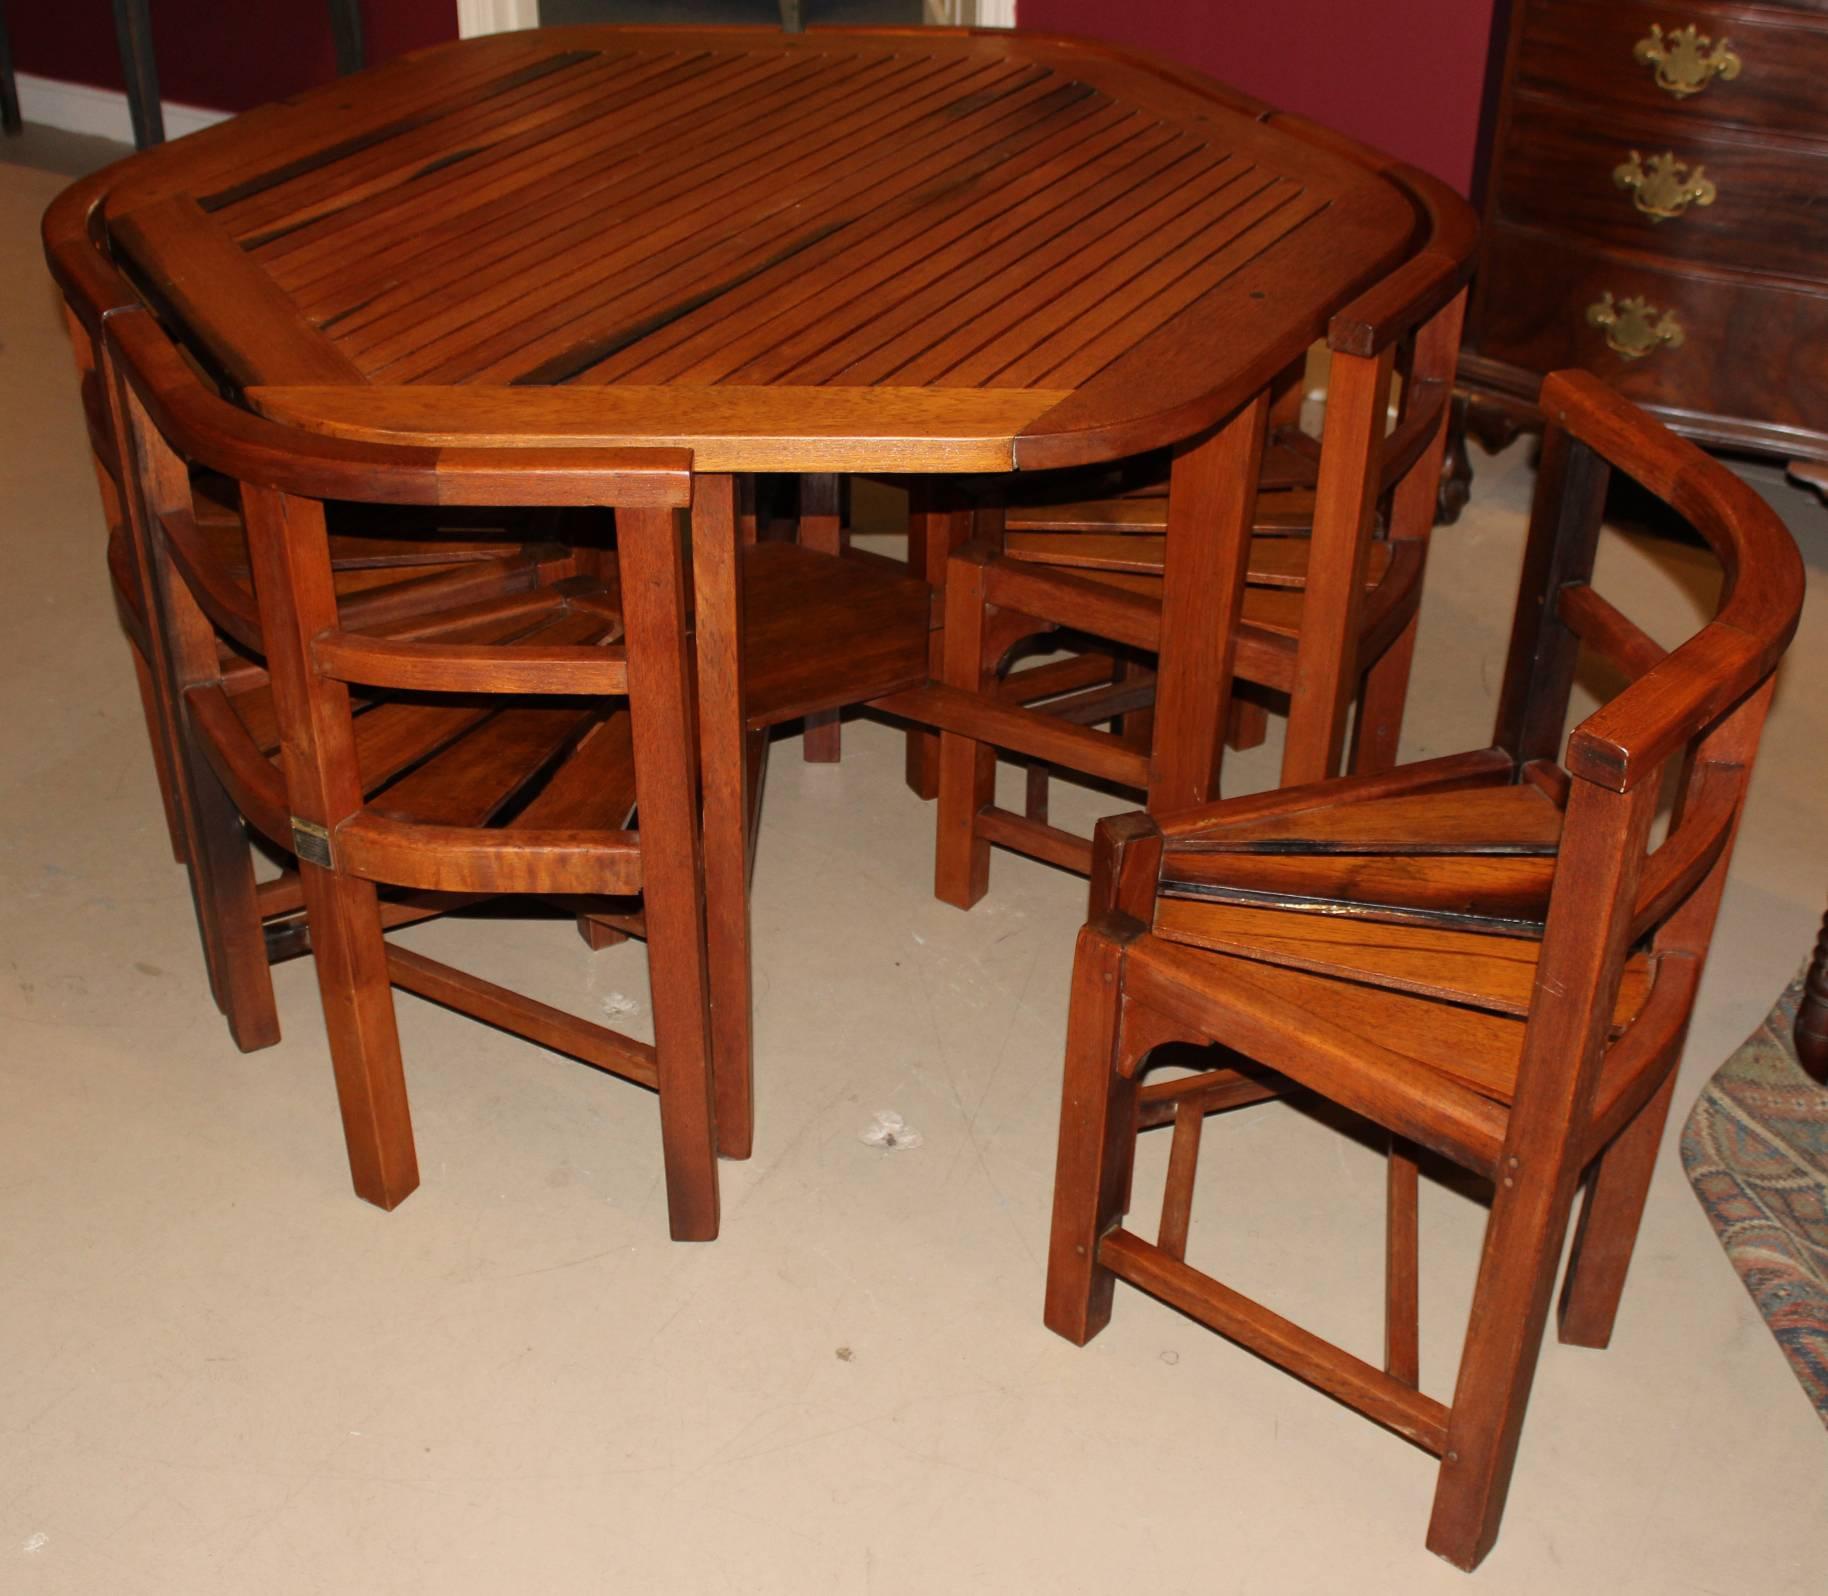 A solid hexagonal teak wood garden table with six custom fitted chairs made by Hughes Bolckow Shipbreaking Company Ltd, Blyth Northumberland, from wood salvaged from Winston Churchill’s Admiralty yacht “Enchantress”. A metal tag for the company